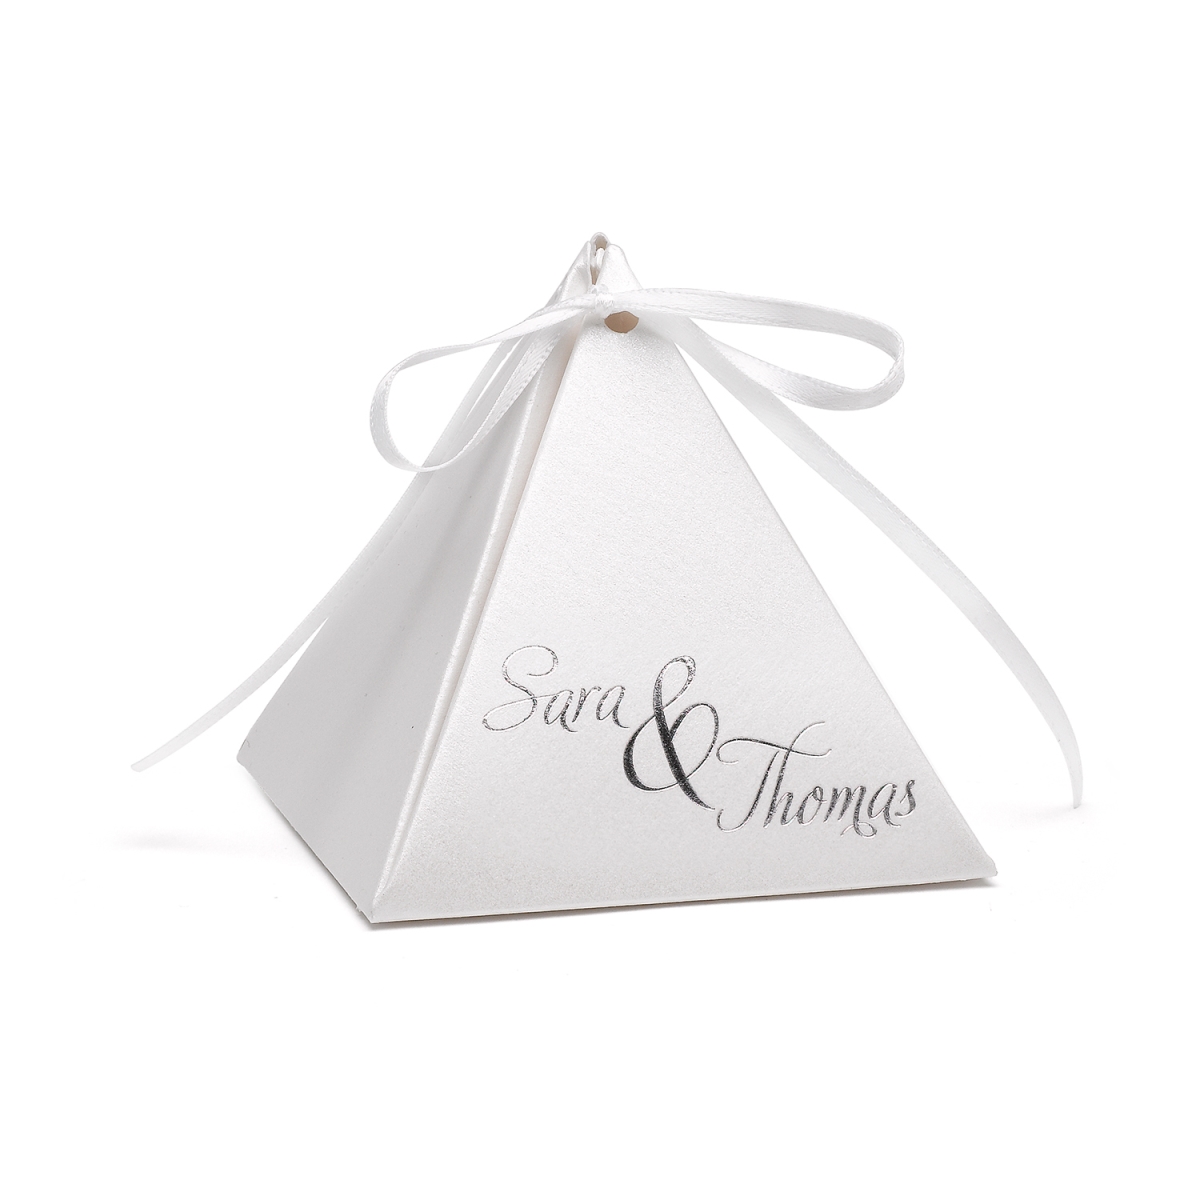 Picture of Hortense B. Hewitt 54880P Pyramid Favor Box - White Shimmer - Personalized